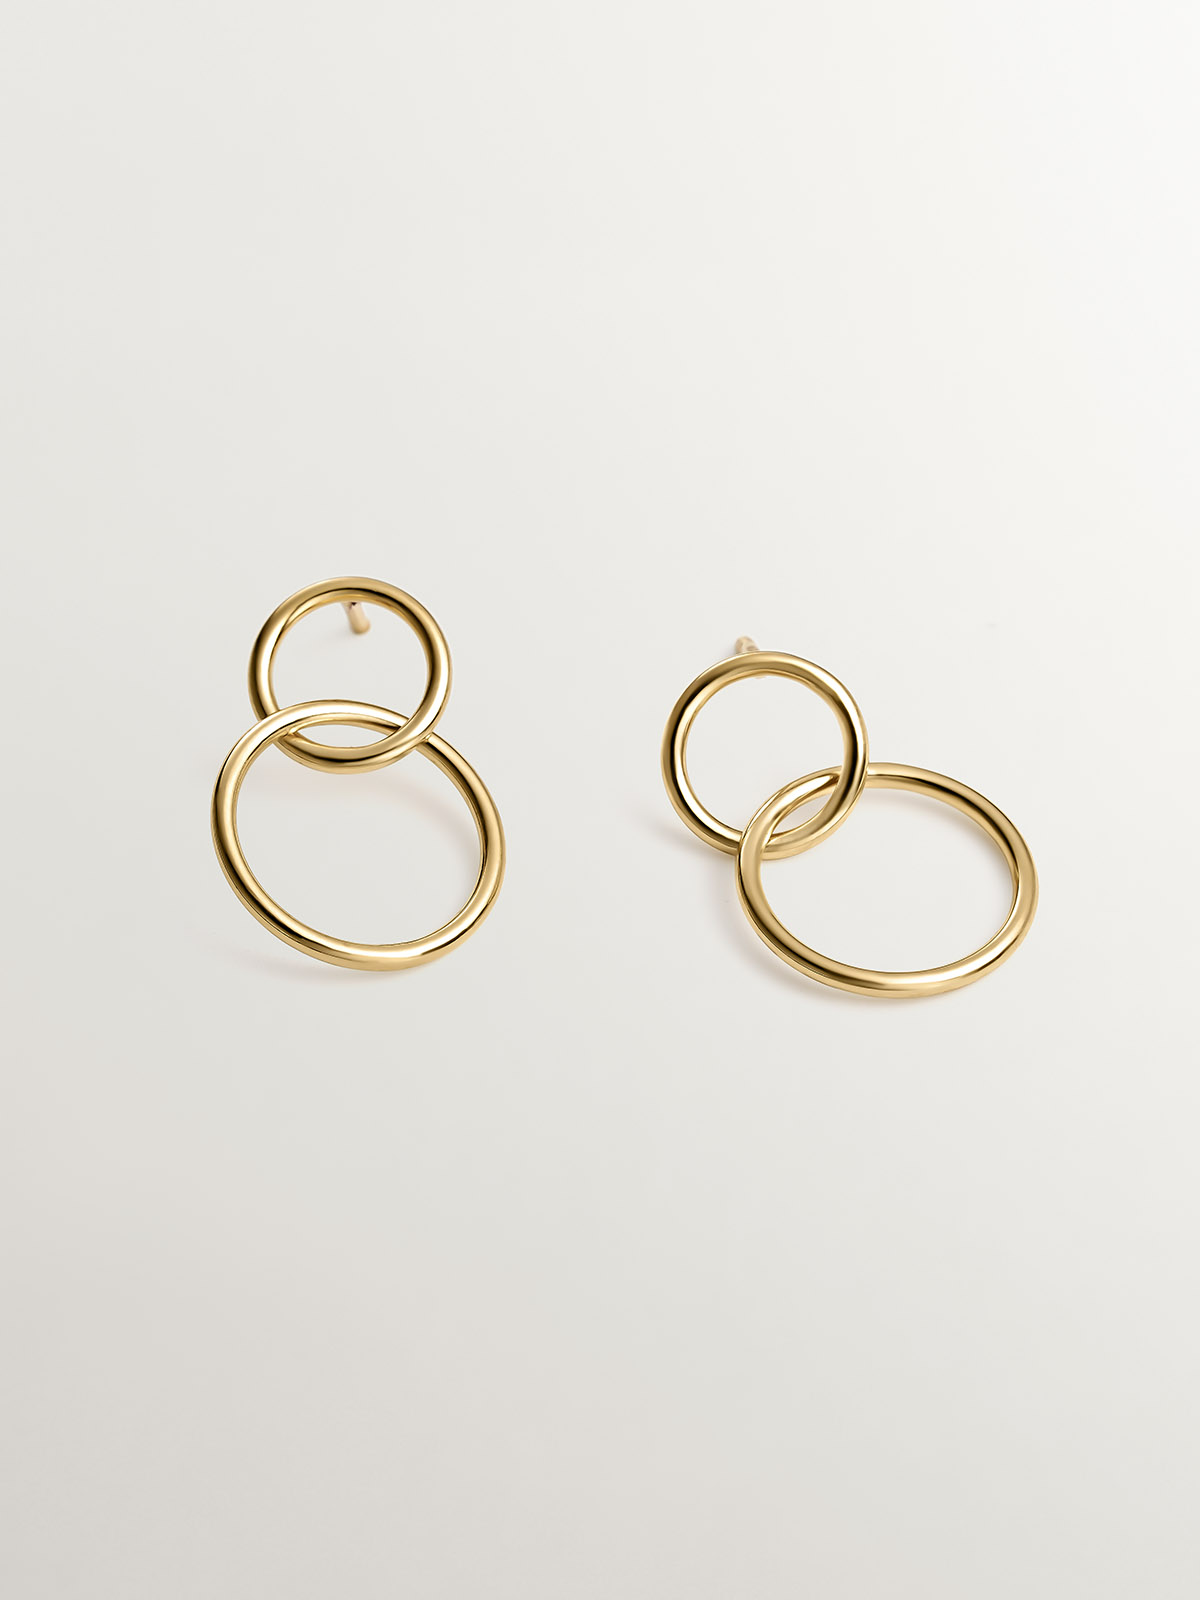 Double hoop earrings made of 925 silver, bathed in 18K yellow gold.